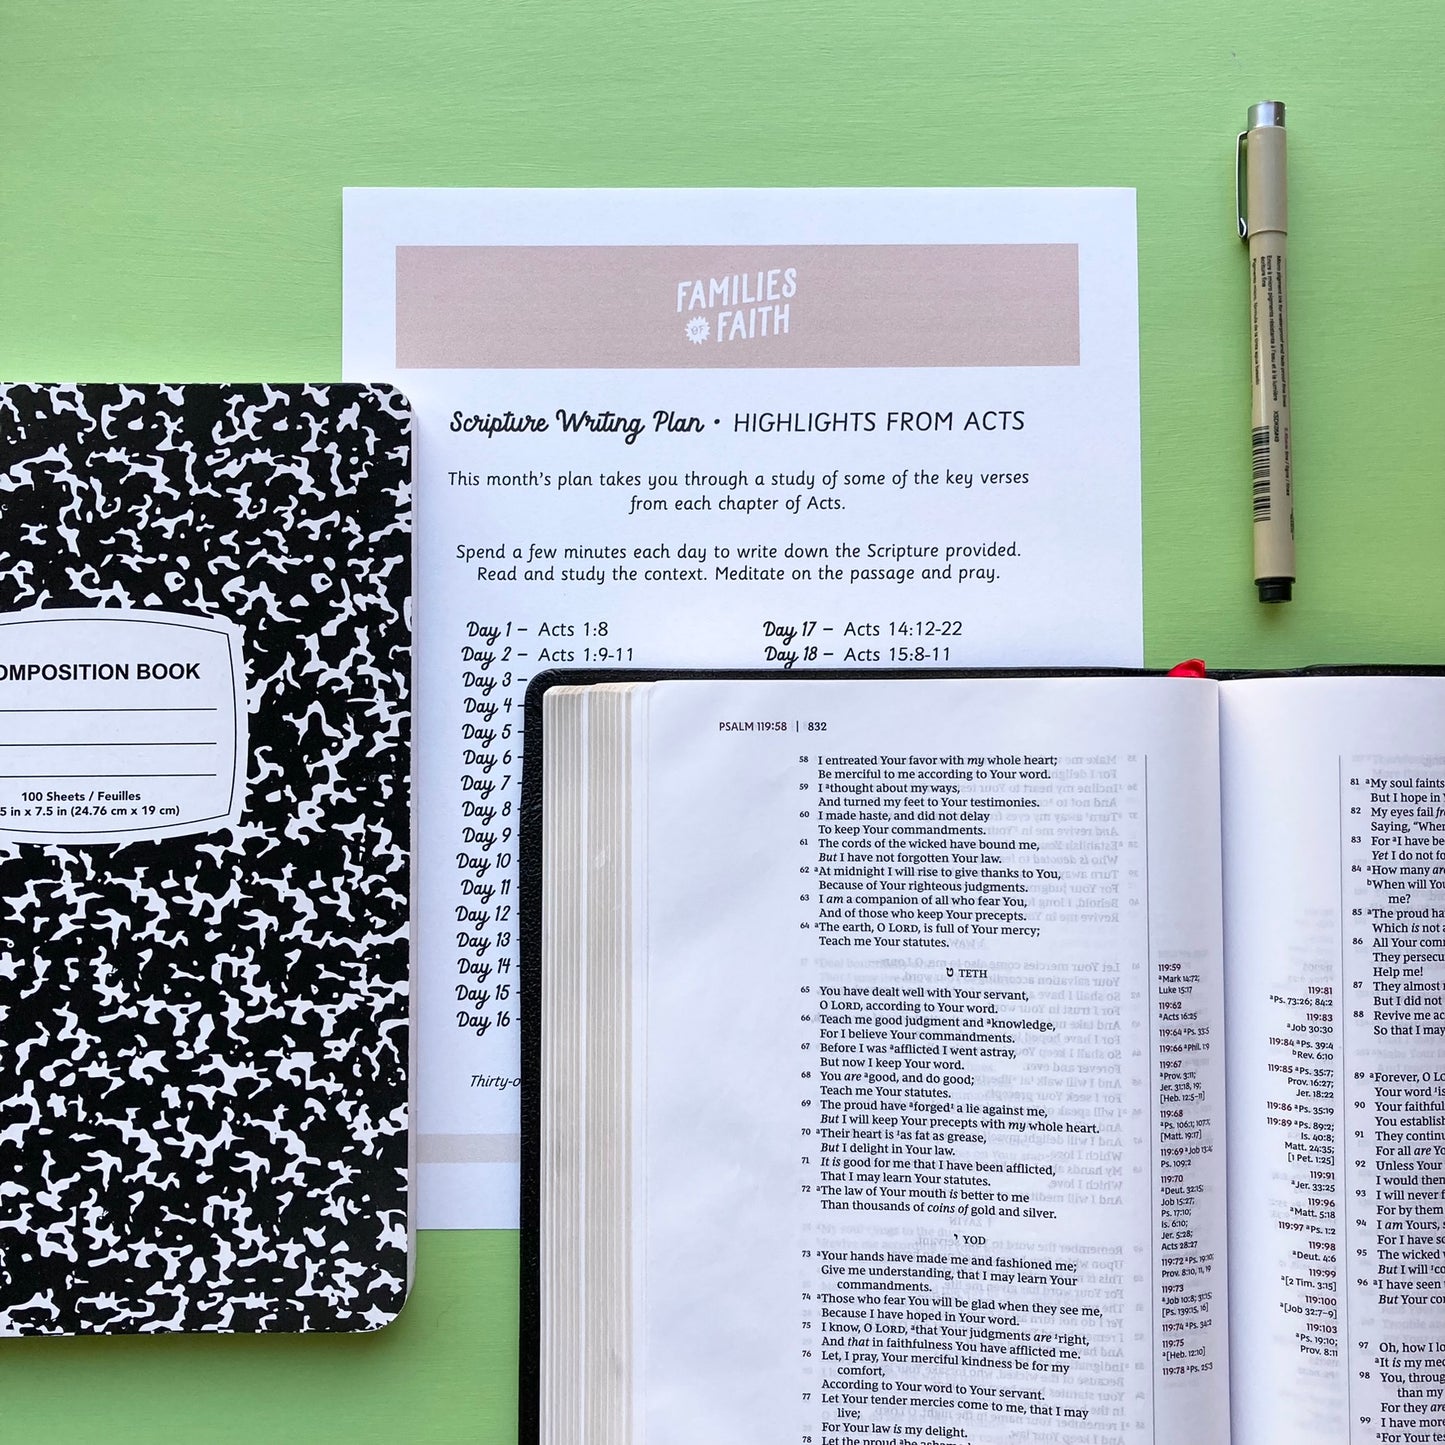 Highlights from Acts Scripture Writing Plan